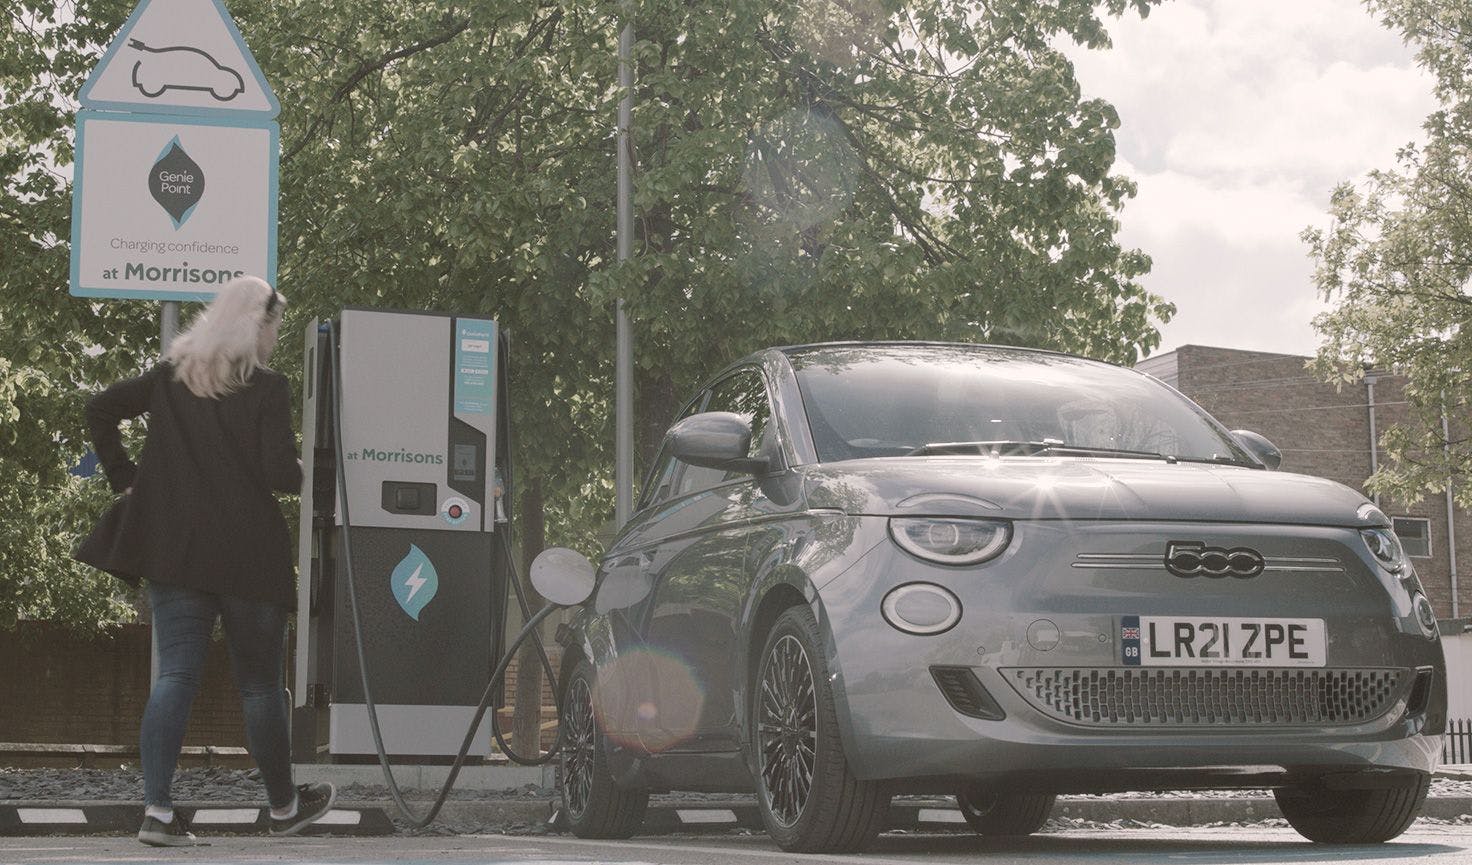 A woman returning to her ev after charging it using a public charge point